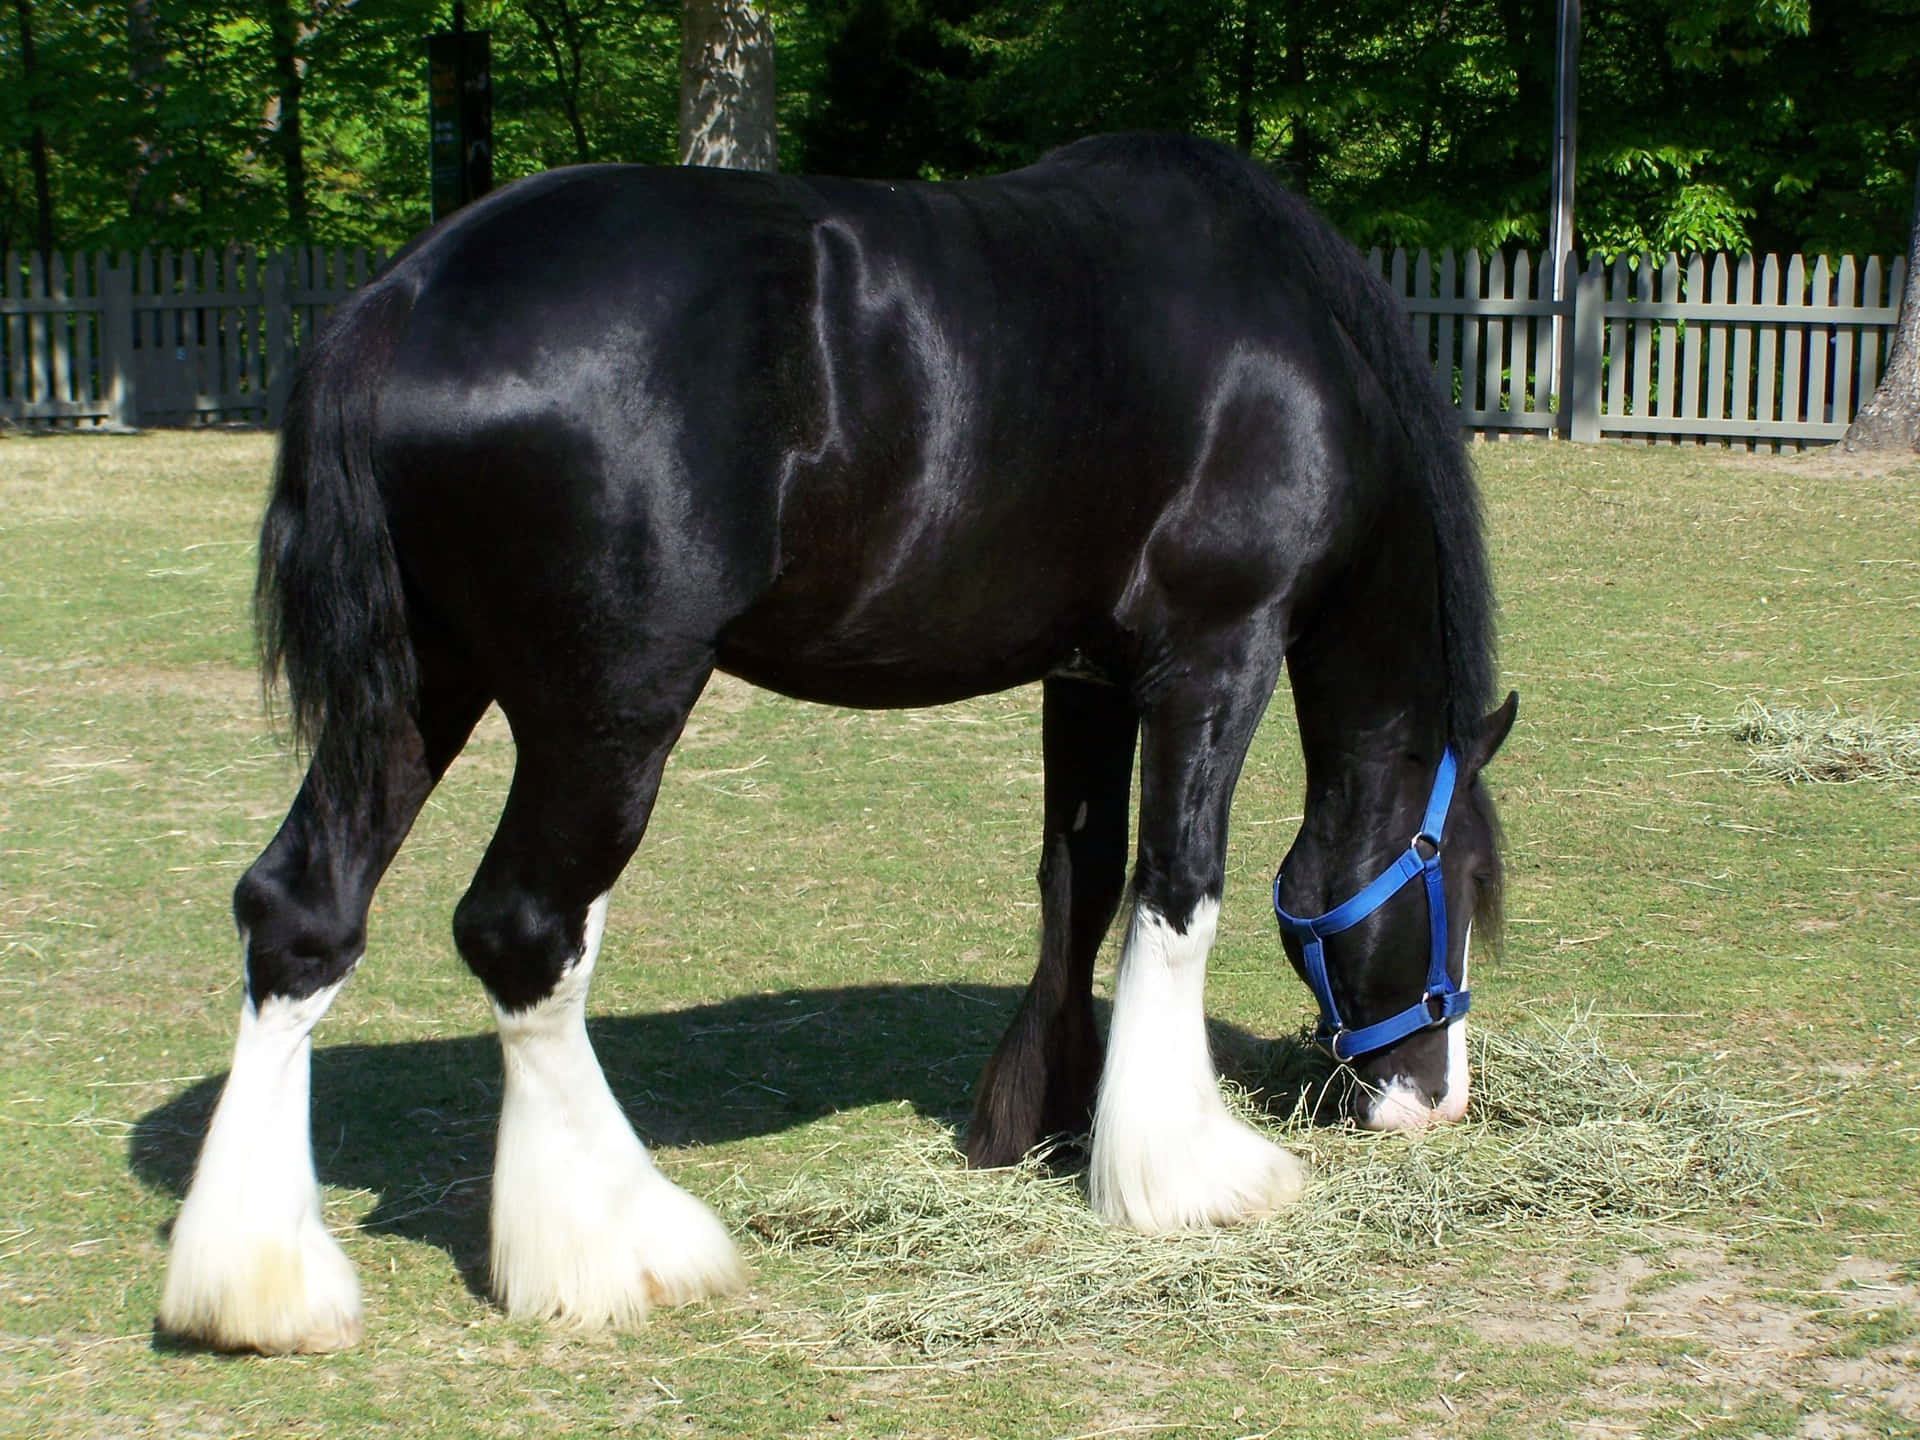 "Gazing proudly at its golden mane, this mighty Clydesdale stands atop a grassy hill."